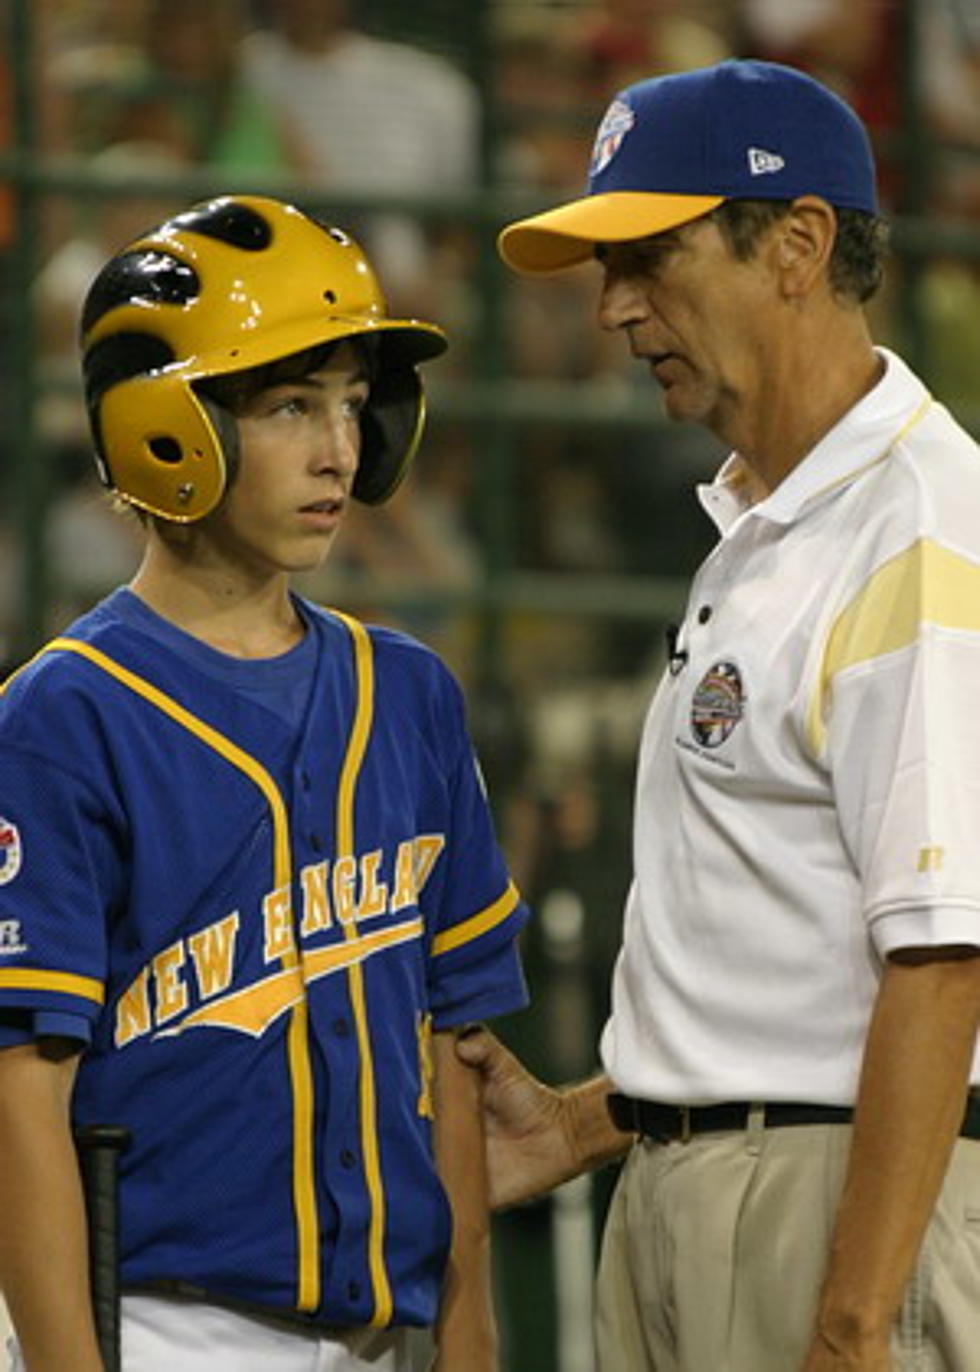 Maine’s History With LLWS [VIDEO]